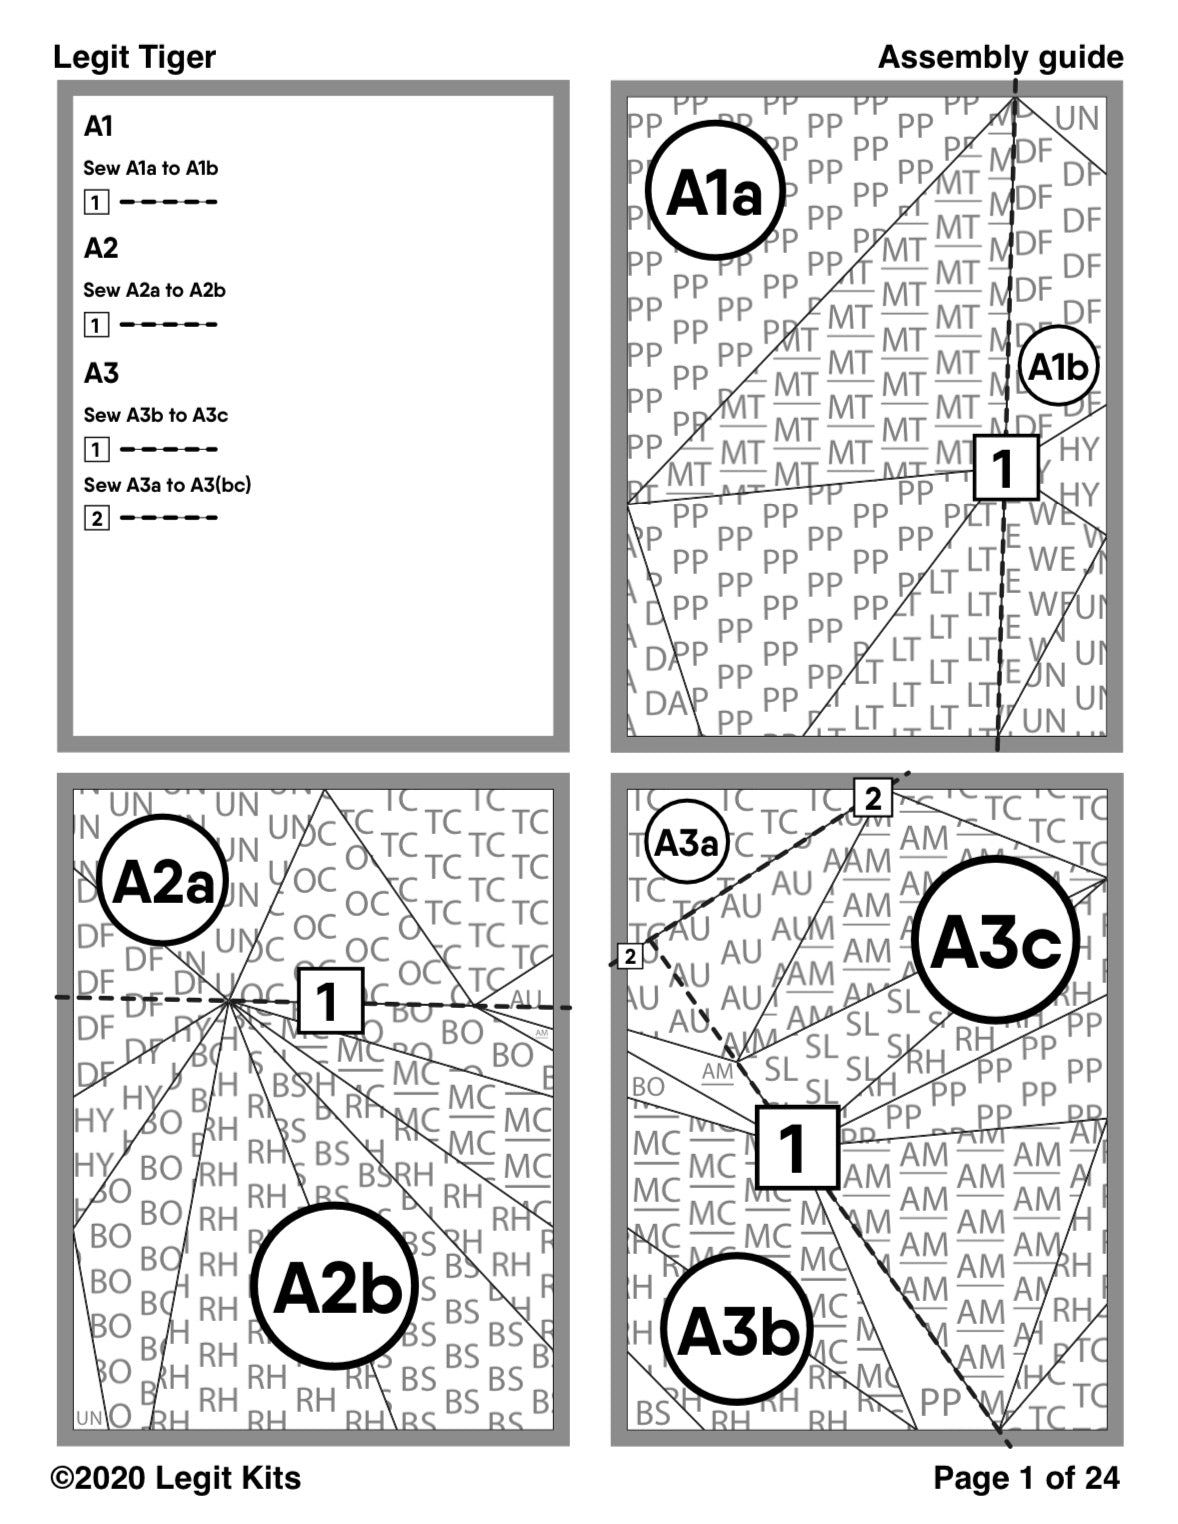 Assembly guide, shows how complex blocks are pieced together.